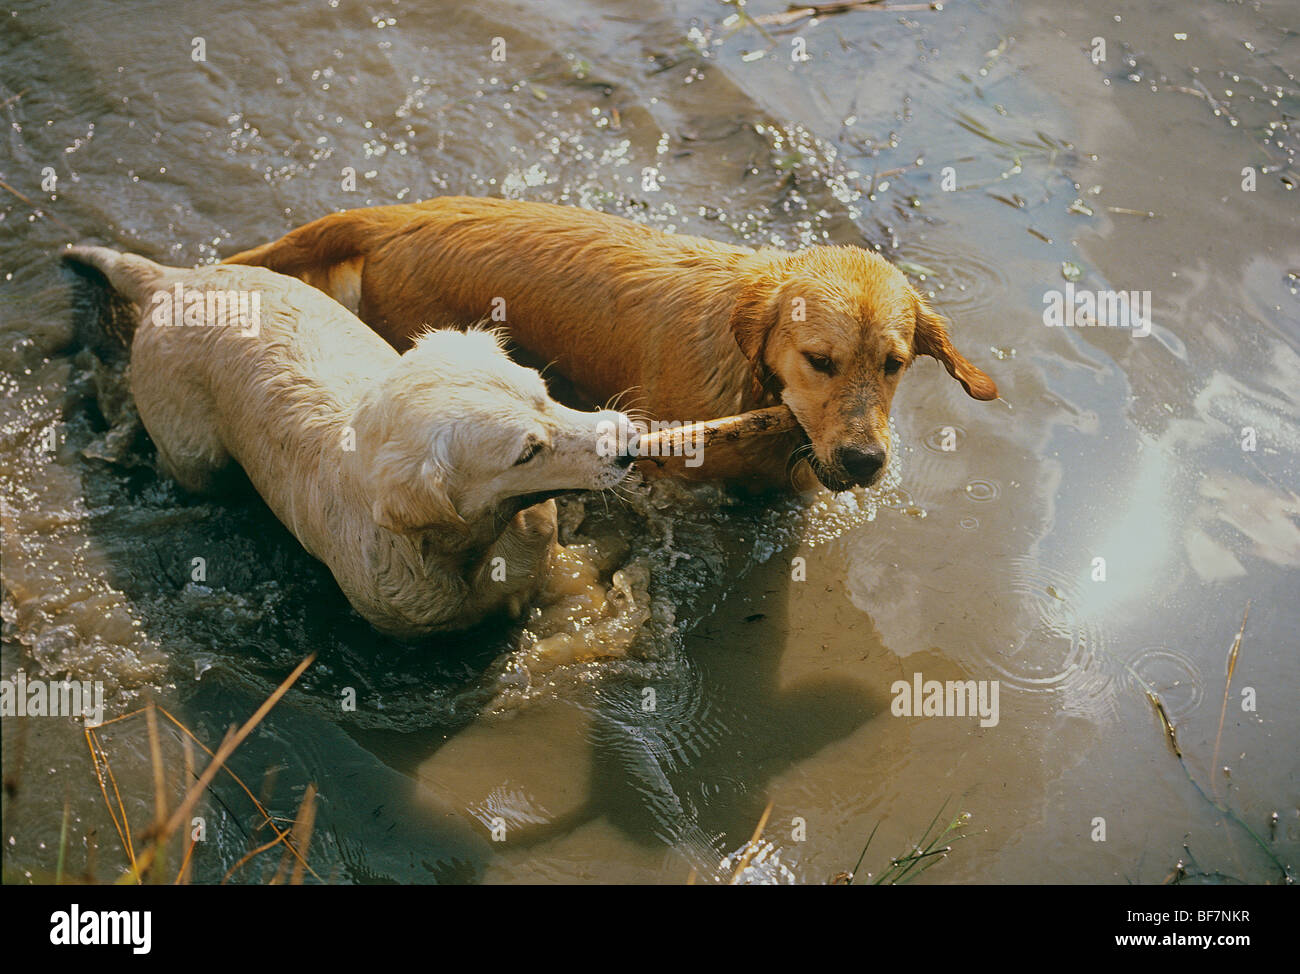 two Golden Retriever dogs in water with stick Stock Photo